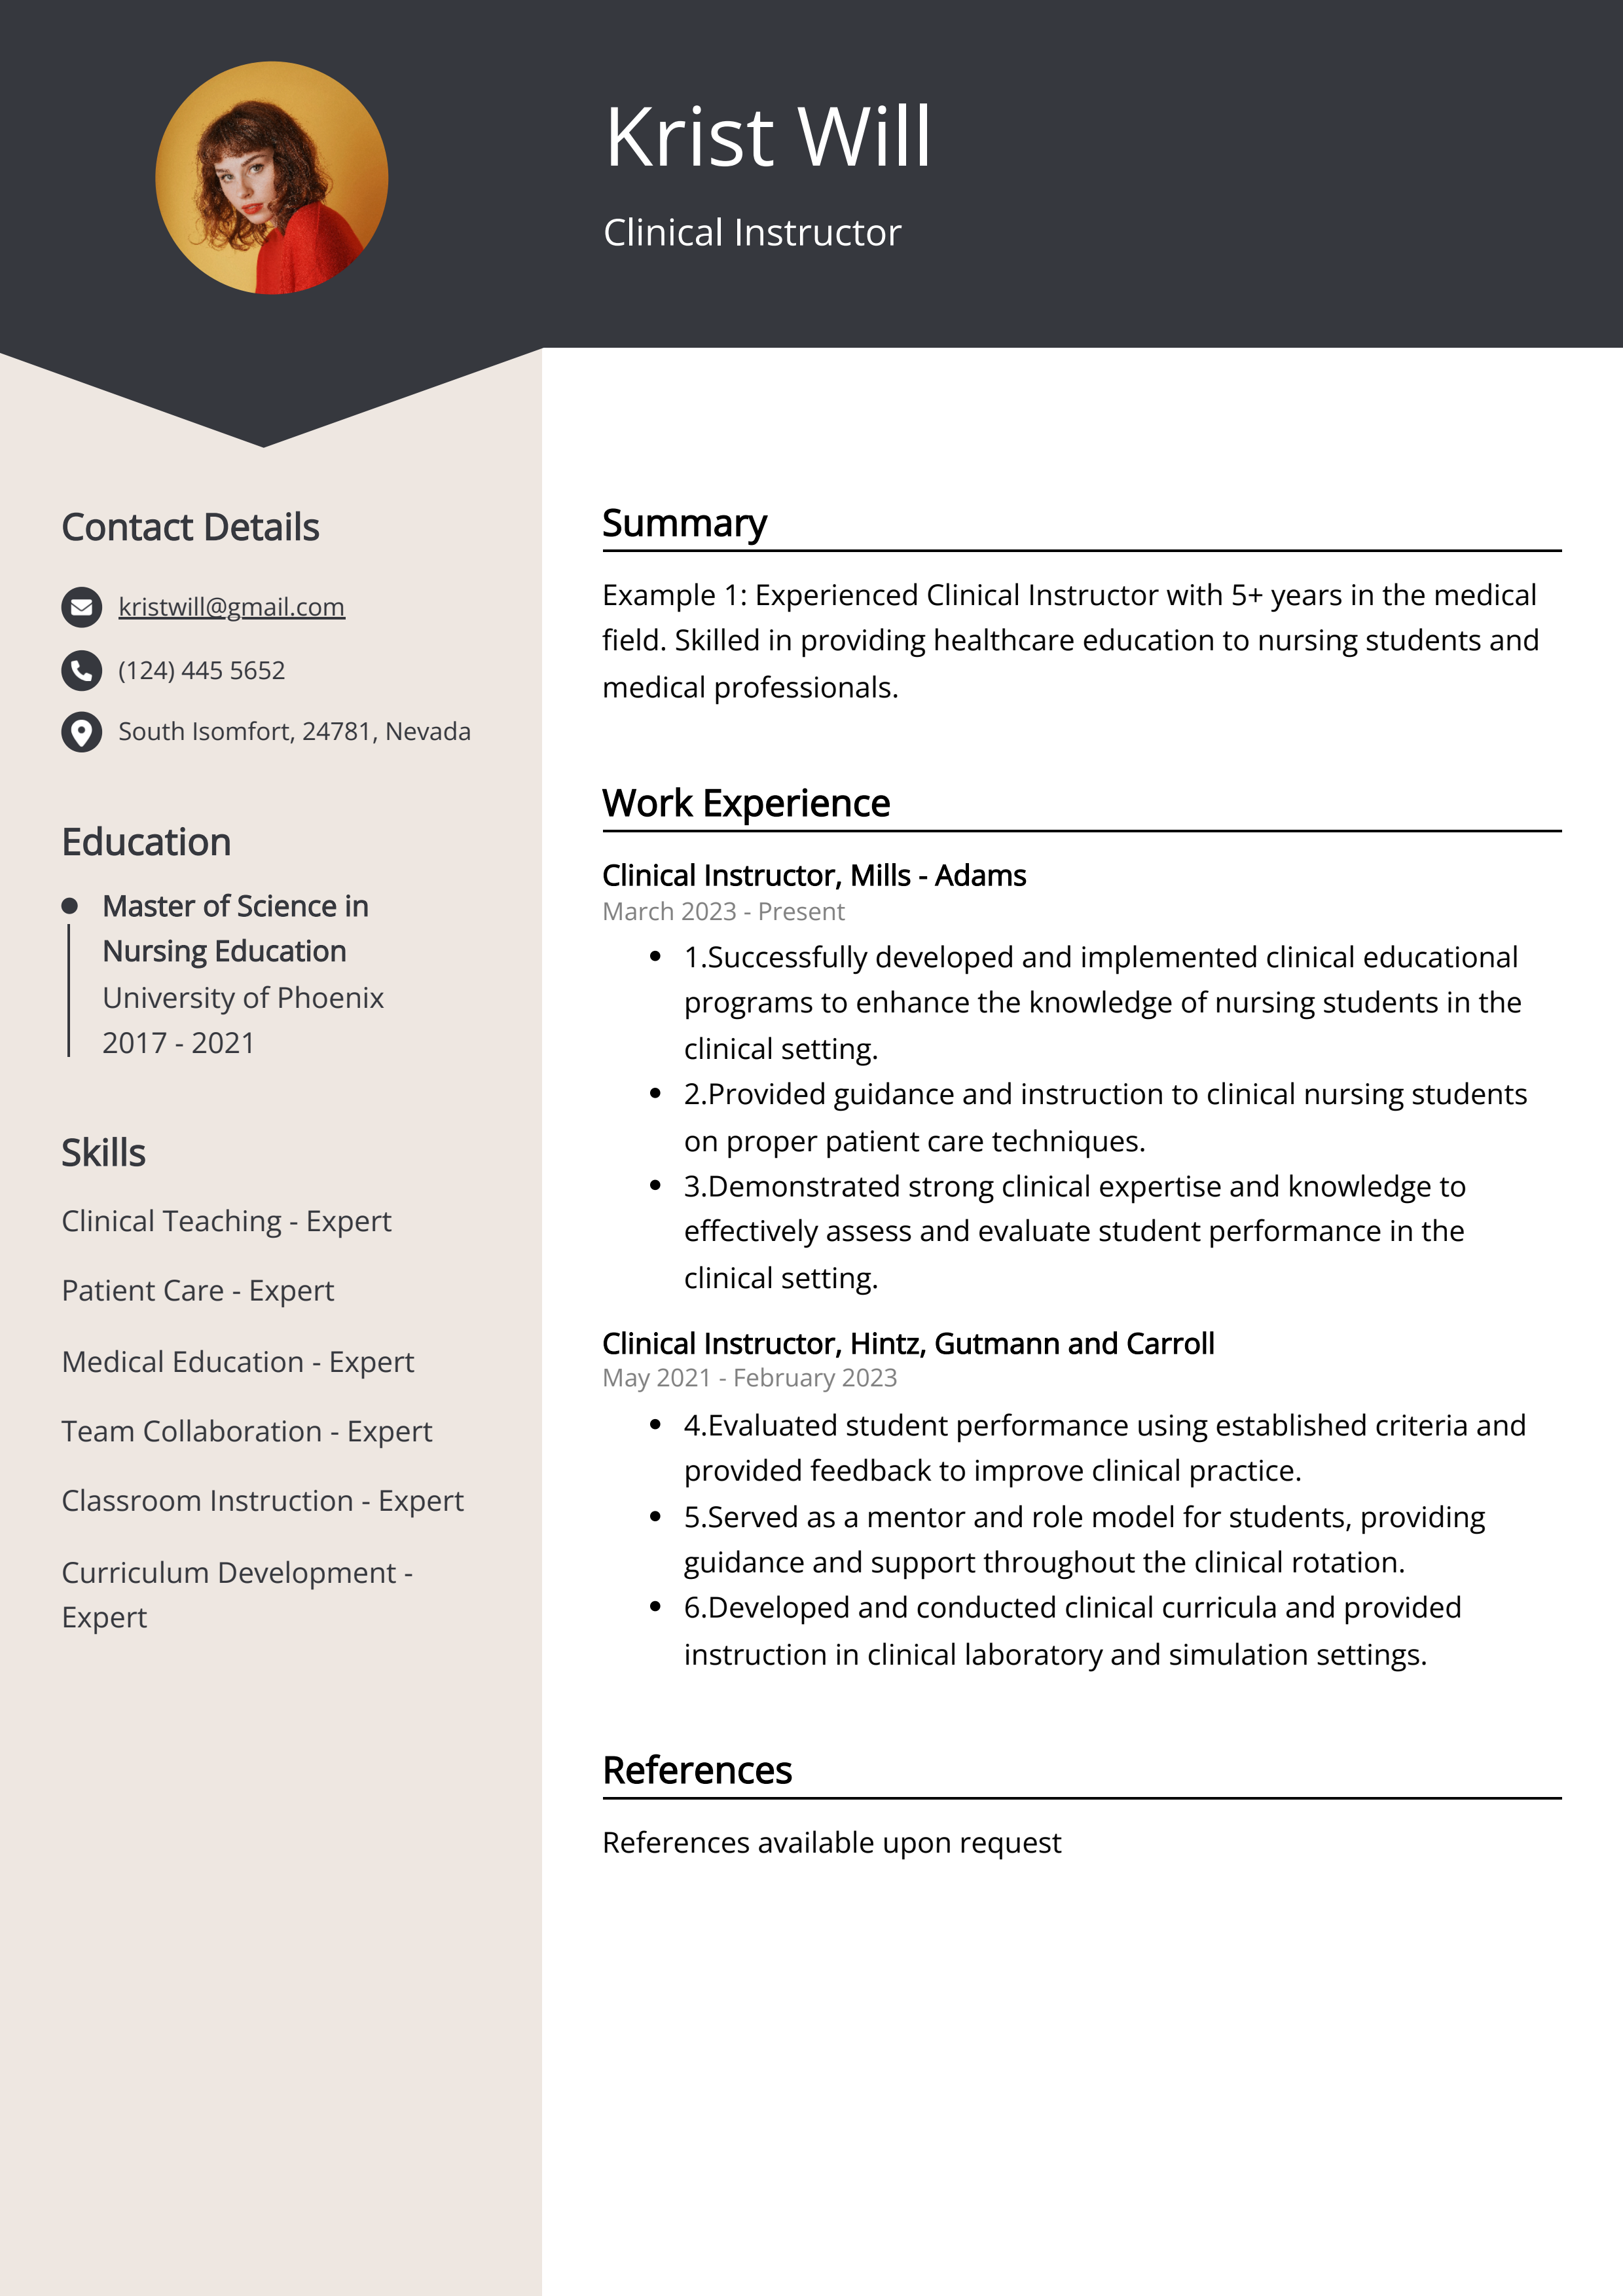 Clinical Instructor CV Example